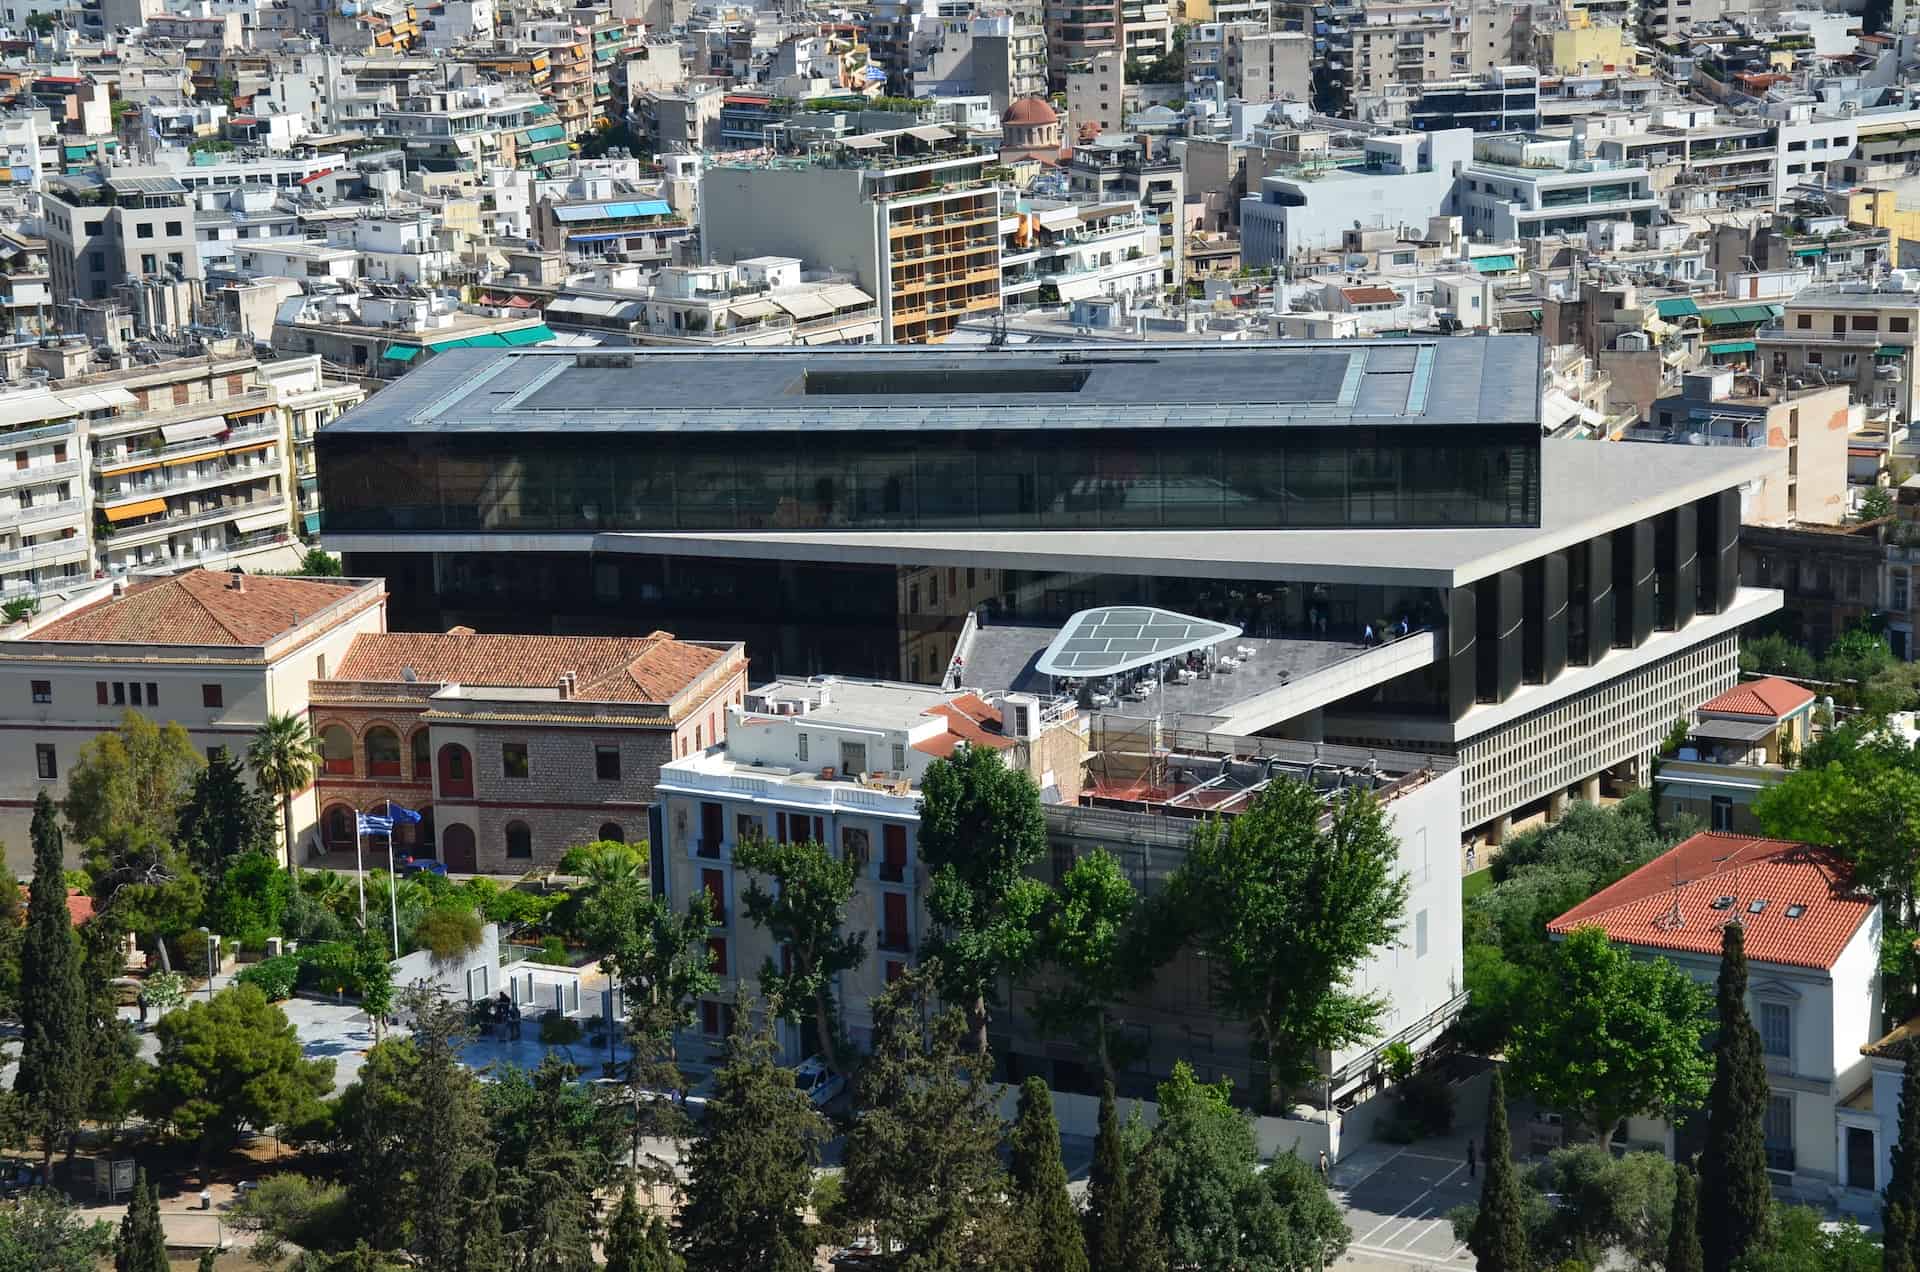 Acropolis Museum in Athens, Greece